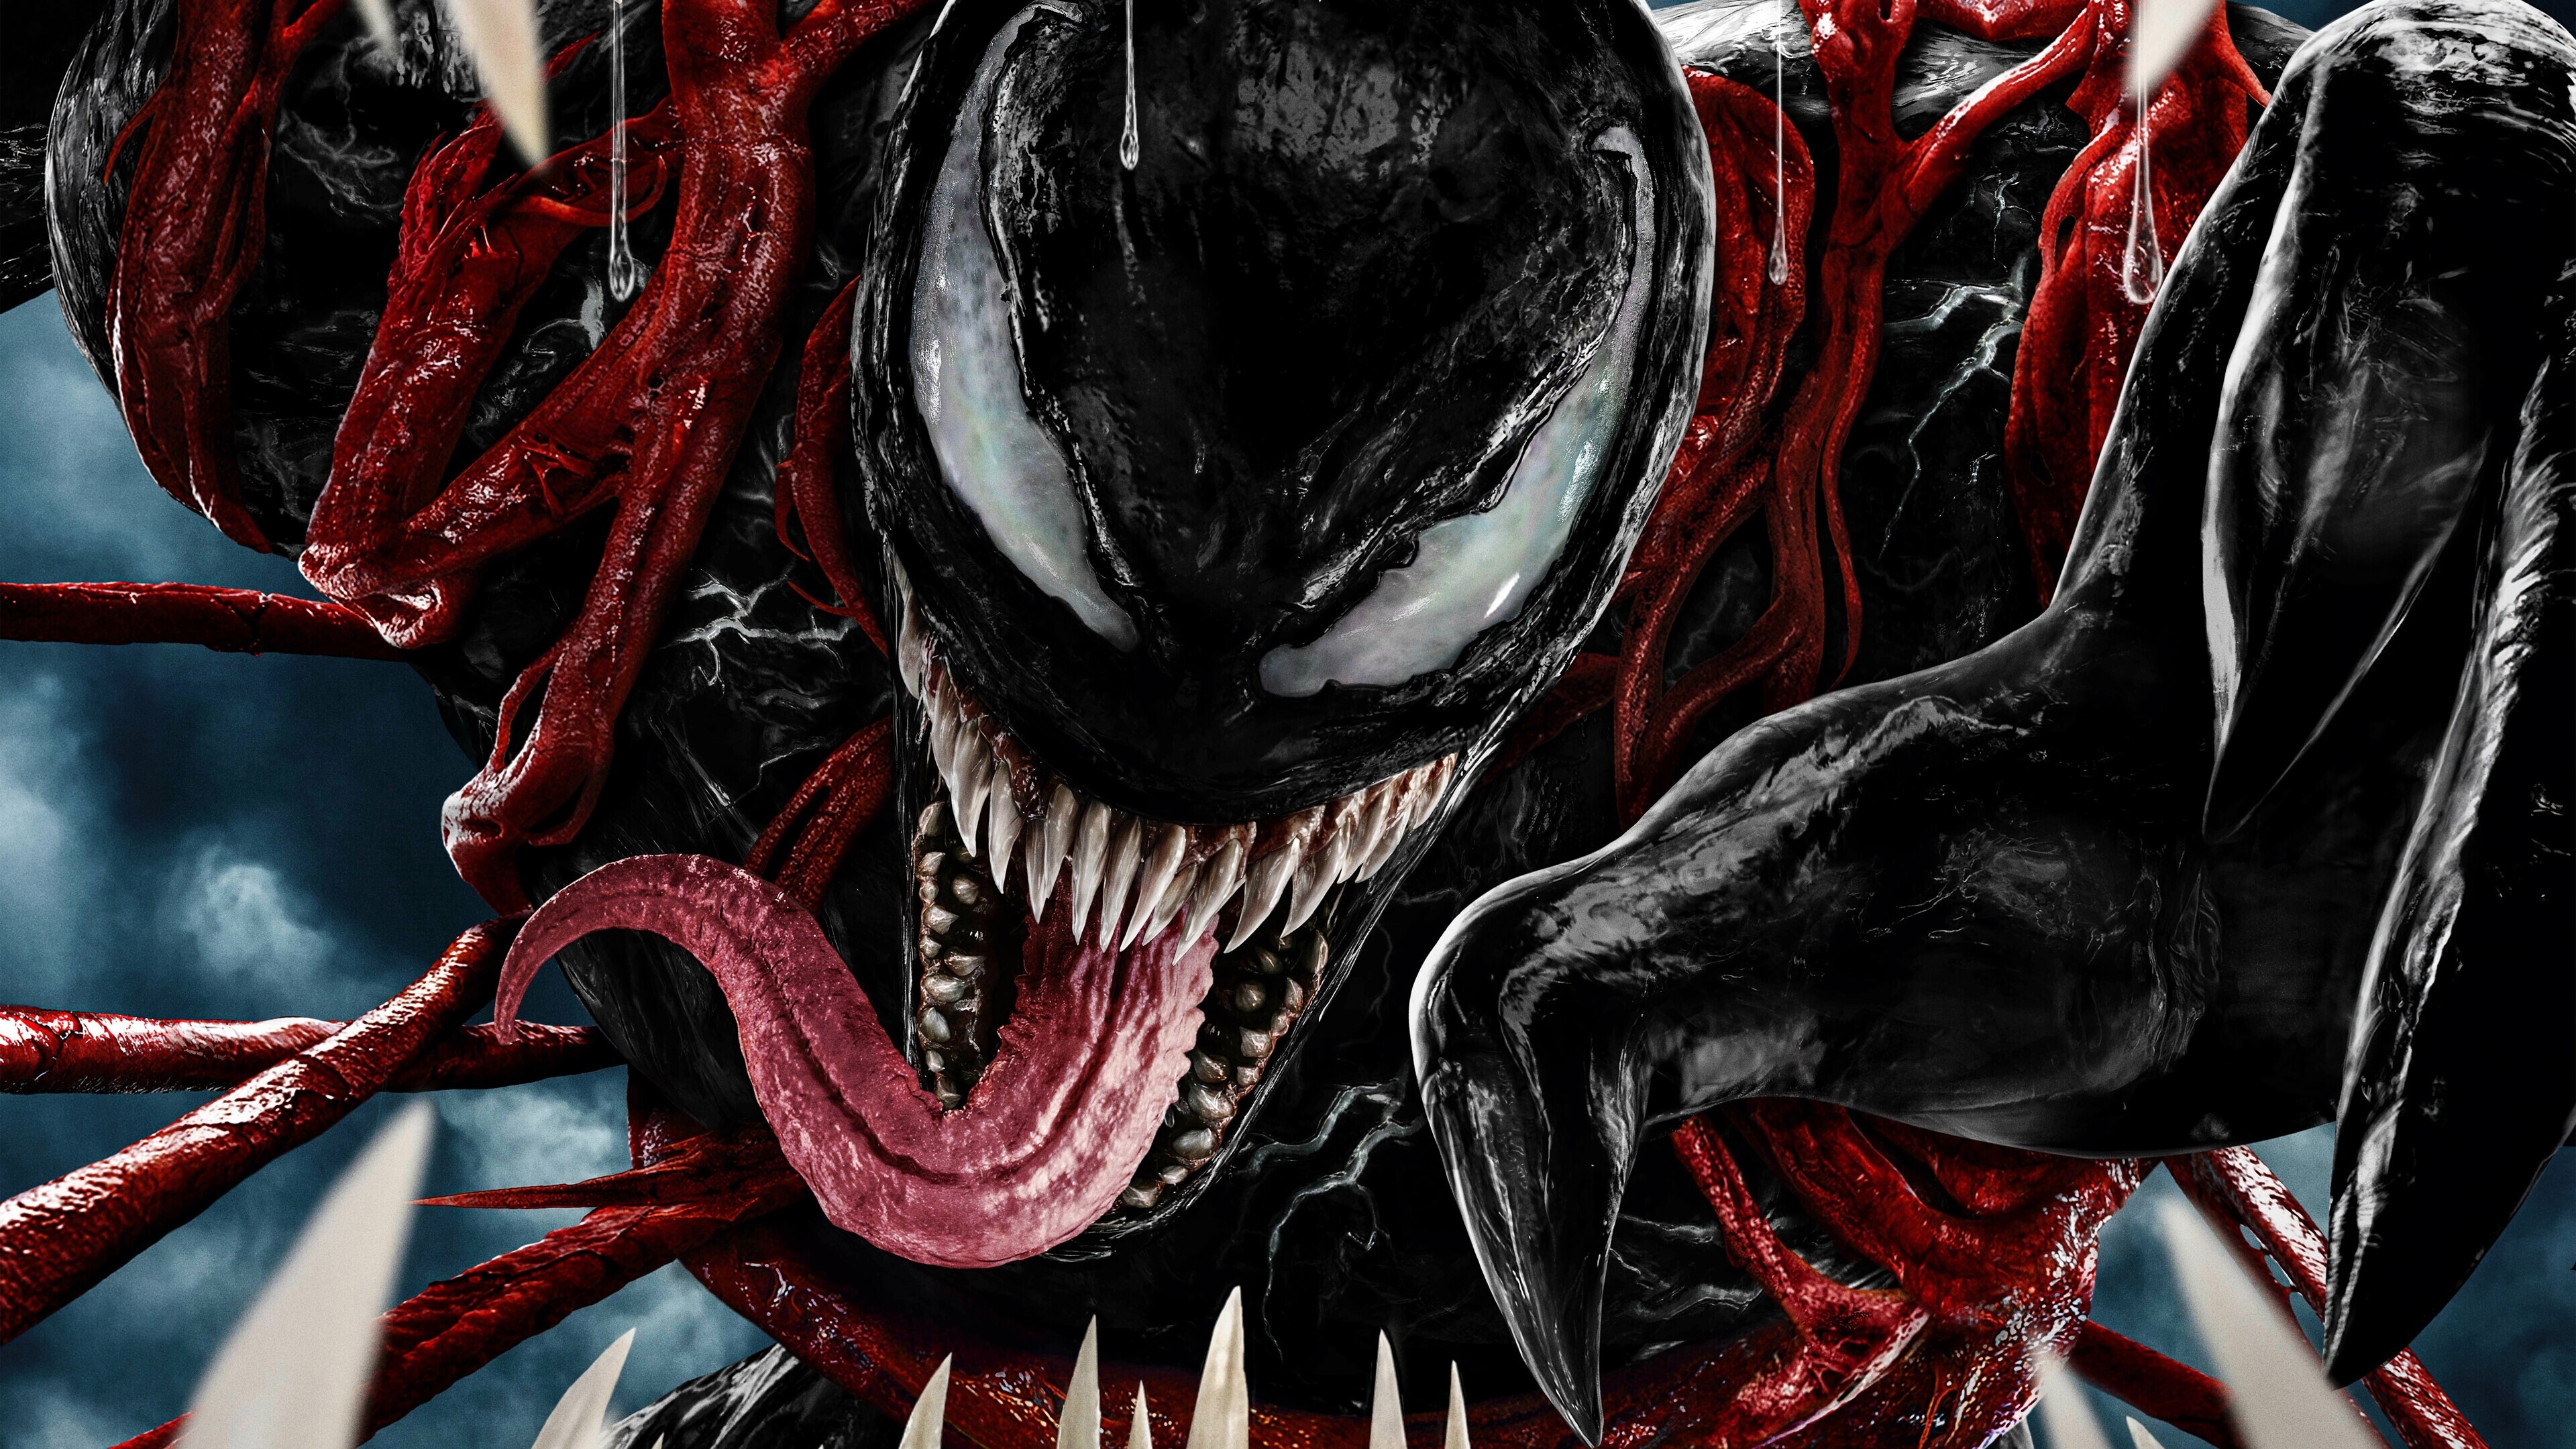 Venom: Let There Be Carnage, A 2021 American superhero film. 3840x2160 4K Wallpaper.